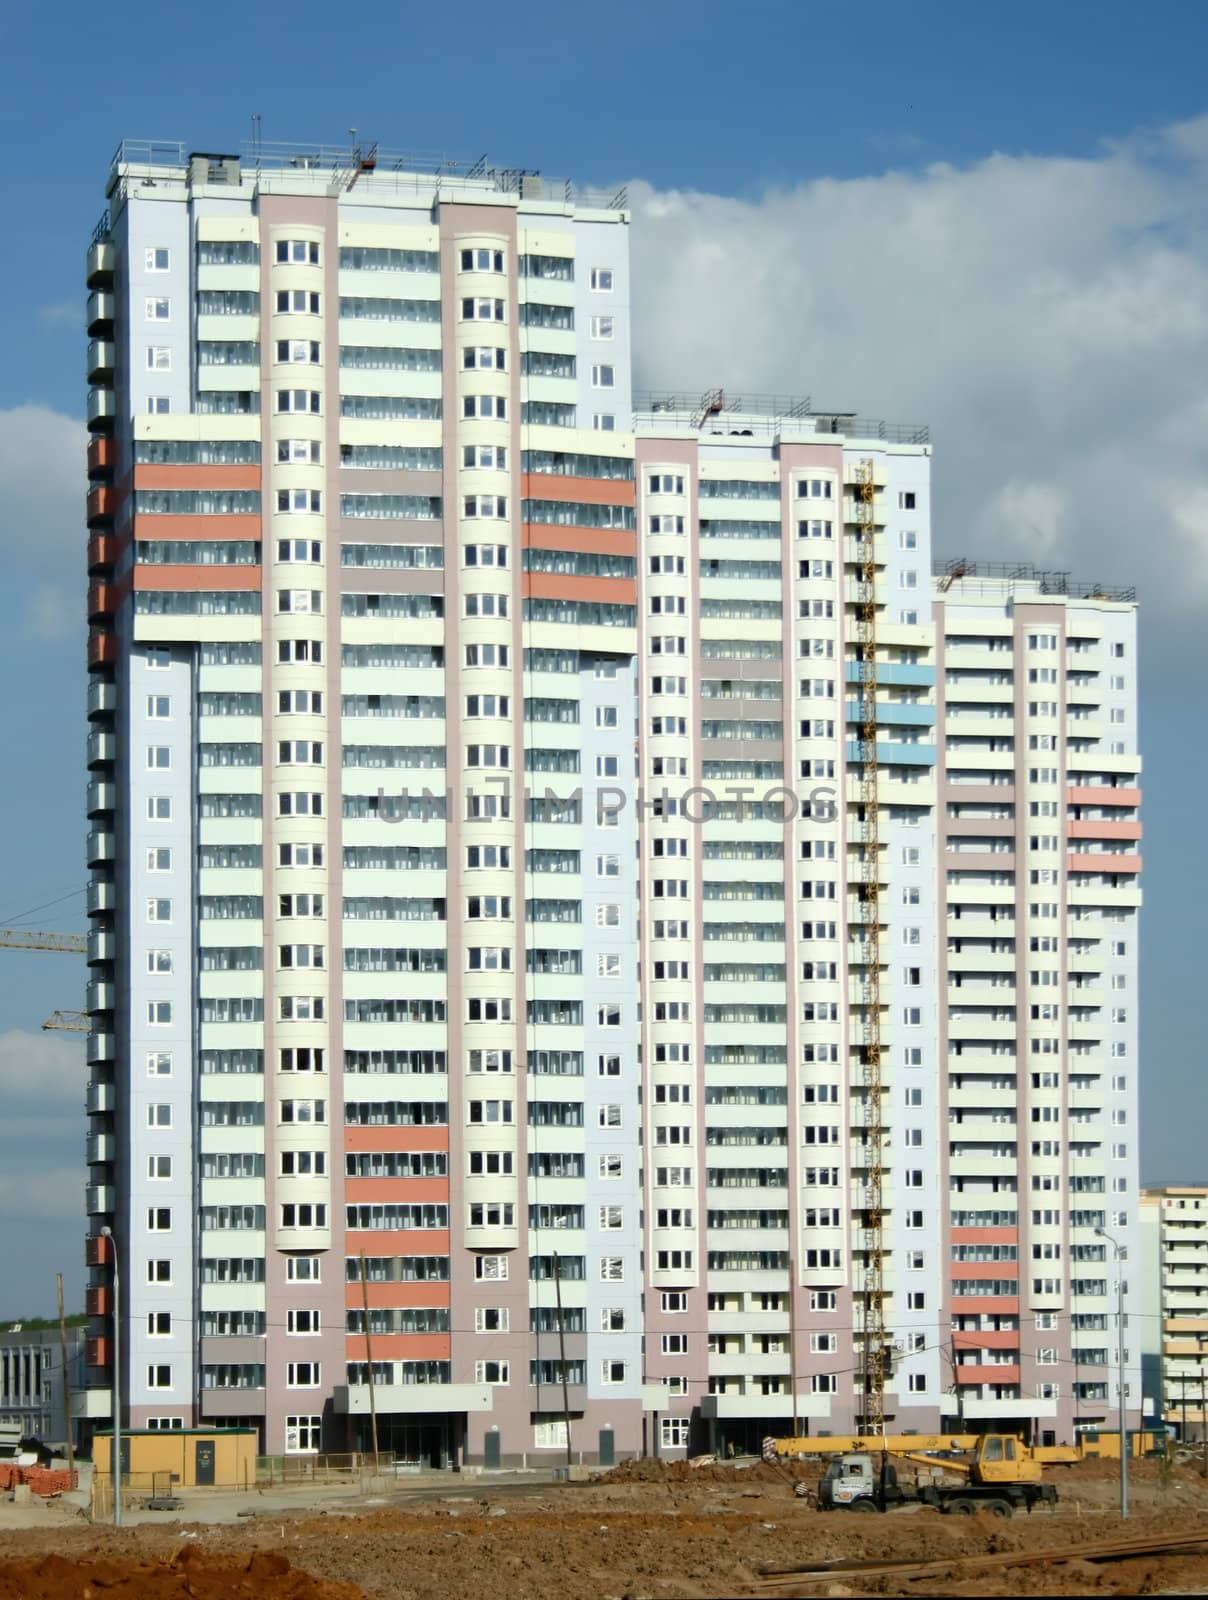 New buildings are in the new district of Moscow